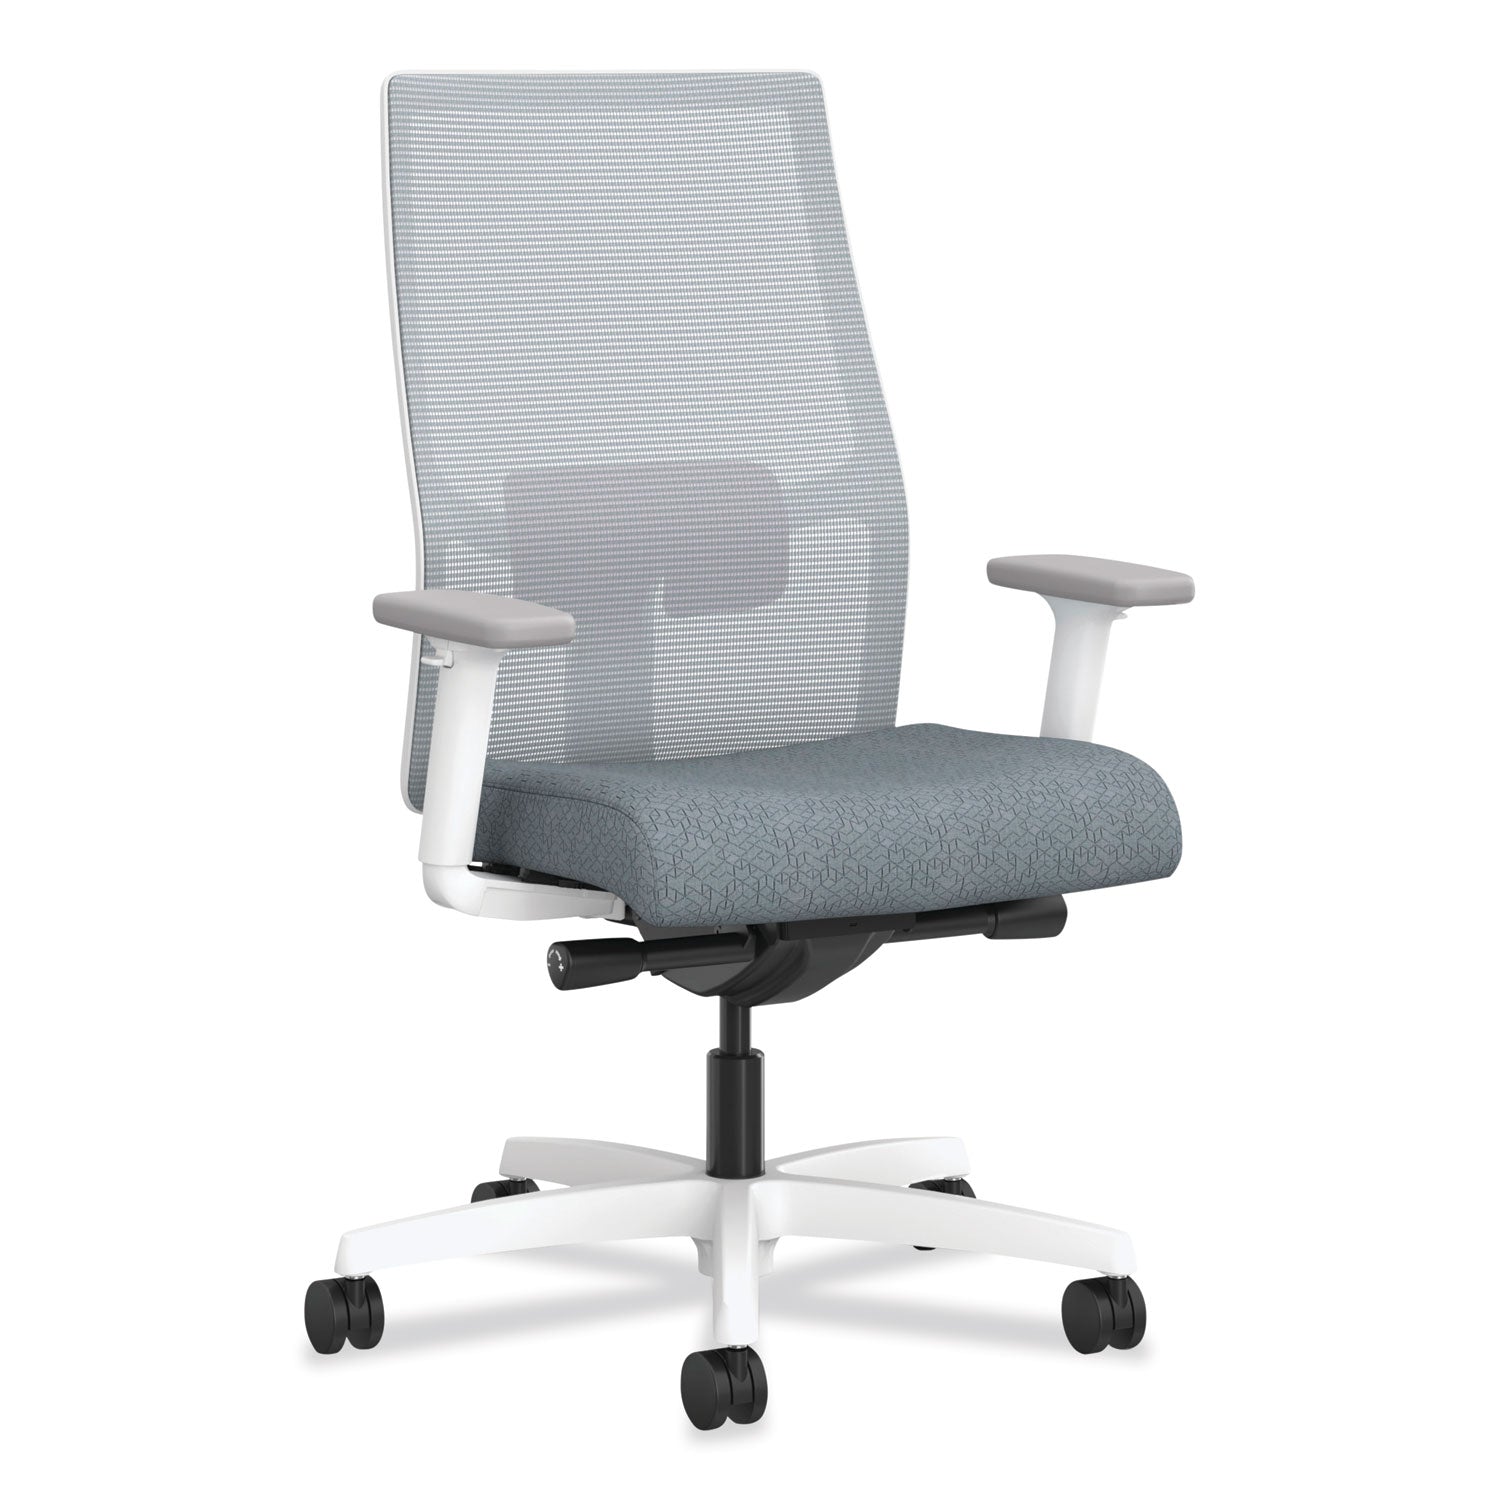 ignition-20-4-way-stretch-mid-back-task-chair-supports-300-lb-17-to-21-seat-ht-basalt-fog-white-ships-in-7-10-bus-days_honi2m2afa25rdw - 1